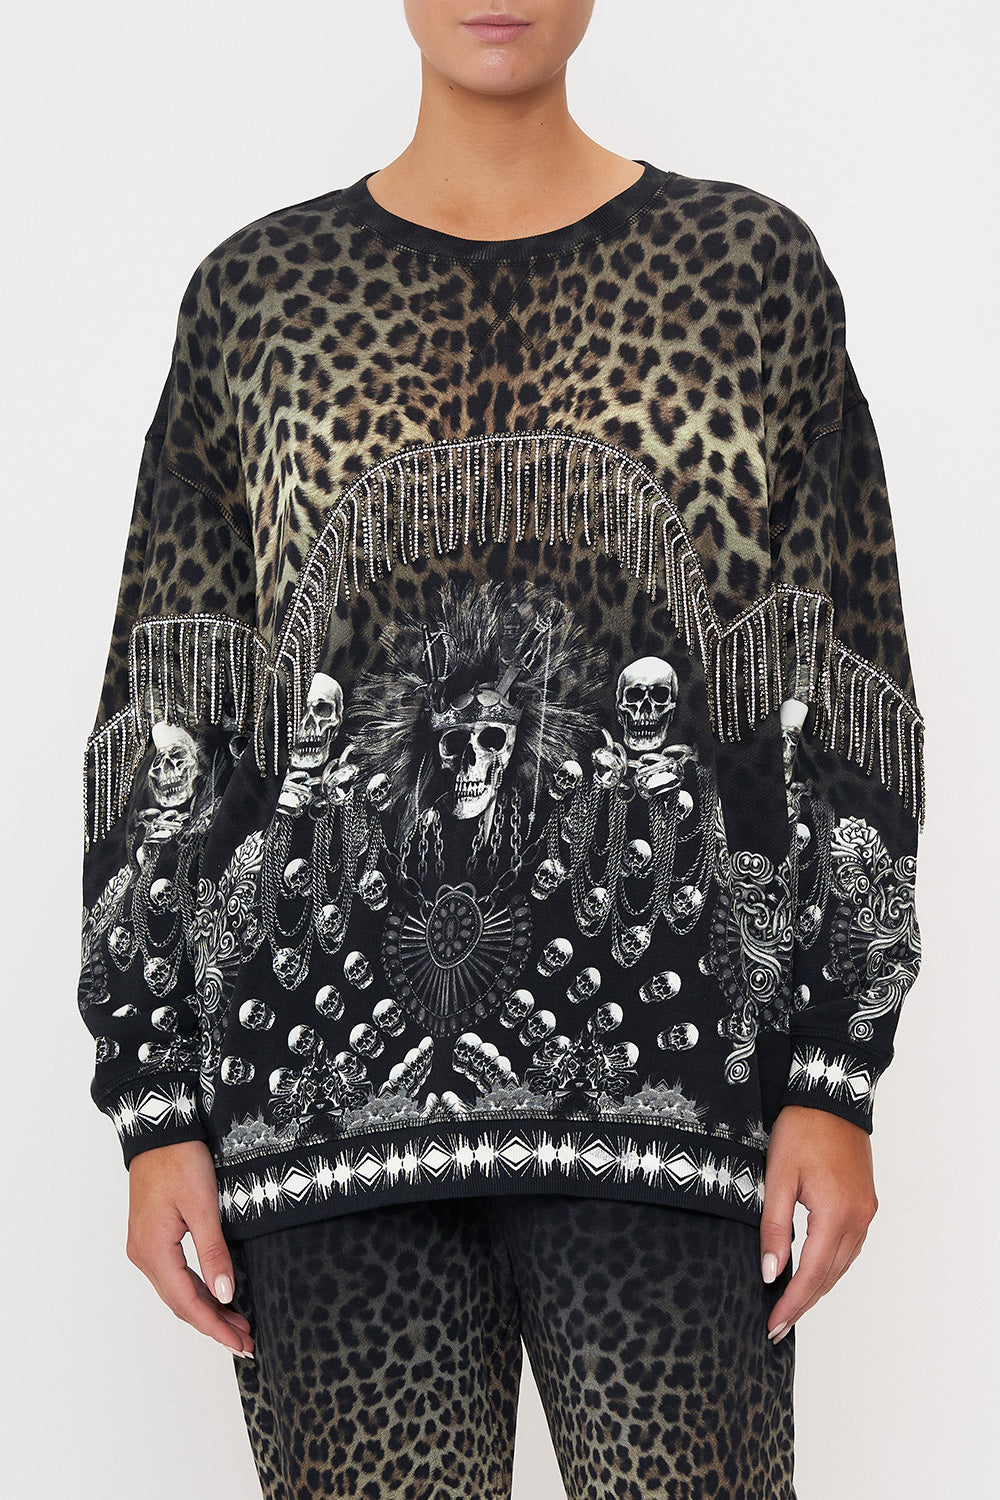 OVERSIZED SWEATER ORDER OF DISORDER LOUNGE